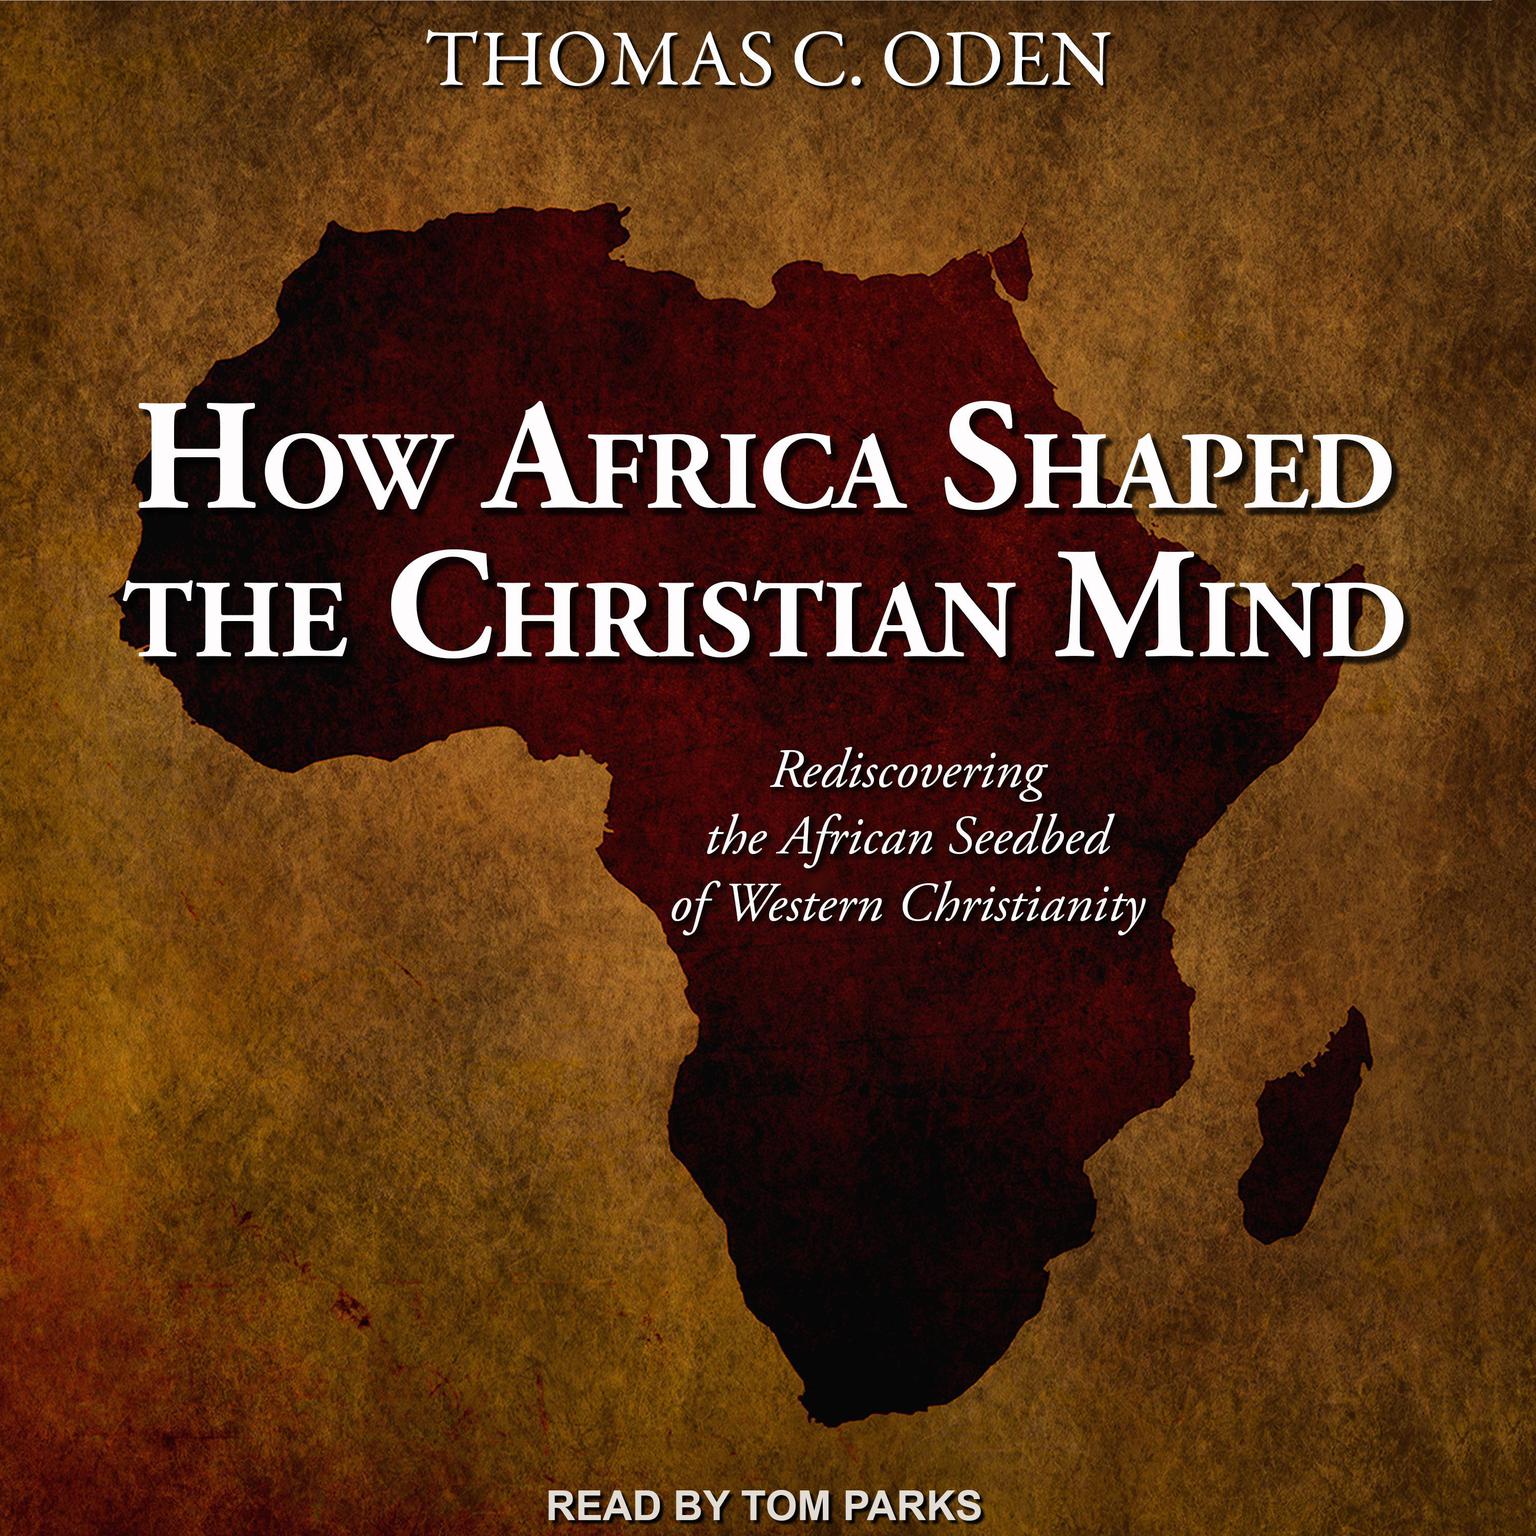 How Africa Shaped the Christian Mind: Rediscovering the African Seedbed of Western Christianity Audiobook, by Thomas C. Oden